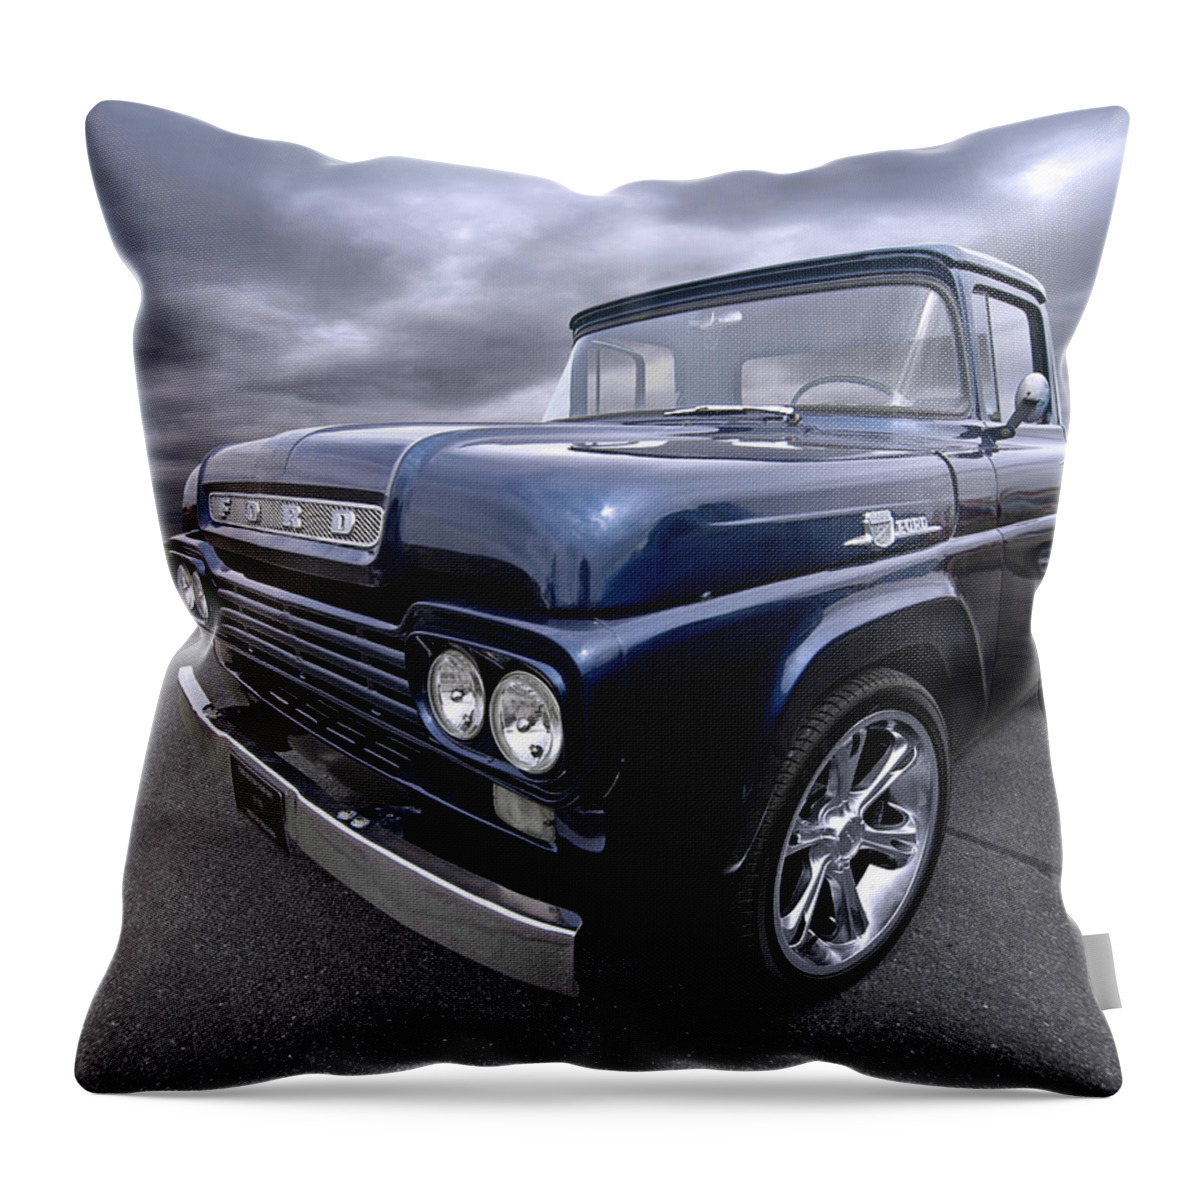 Ford F100 Throw Pillow featuring the photograph 1959 Ford F100 Dark Blue Pickup by Gill Billington